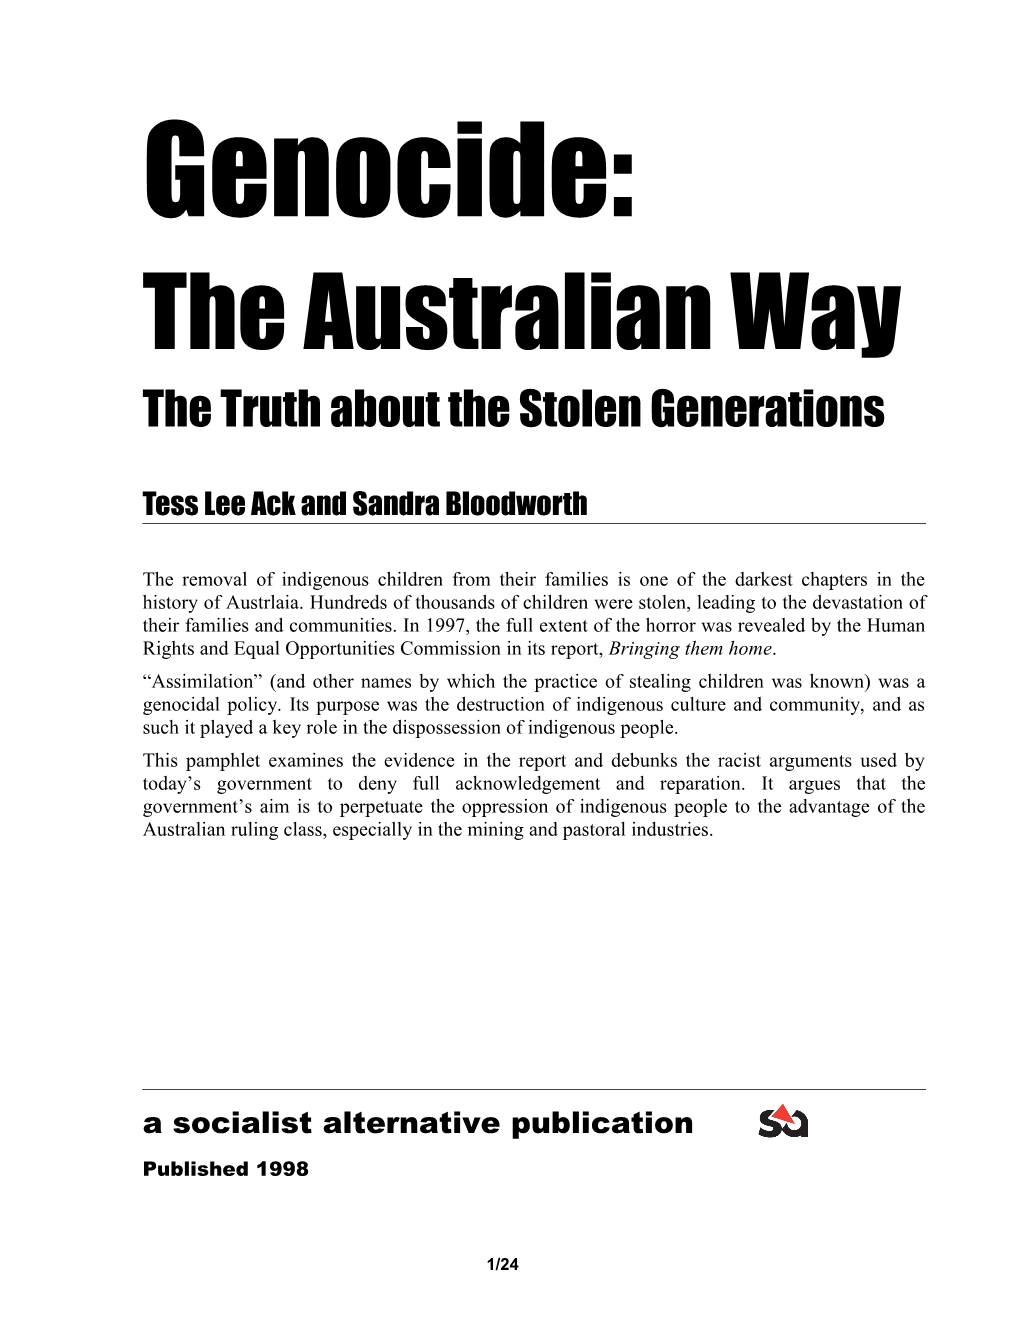 Genocide the Australian Way by Sandra Bloodworth and Tess Lee Ack